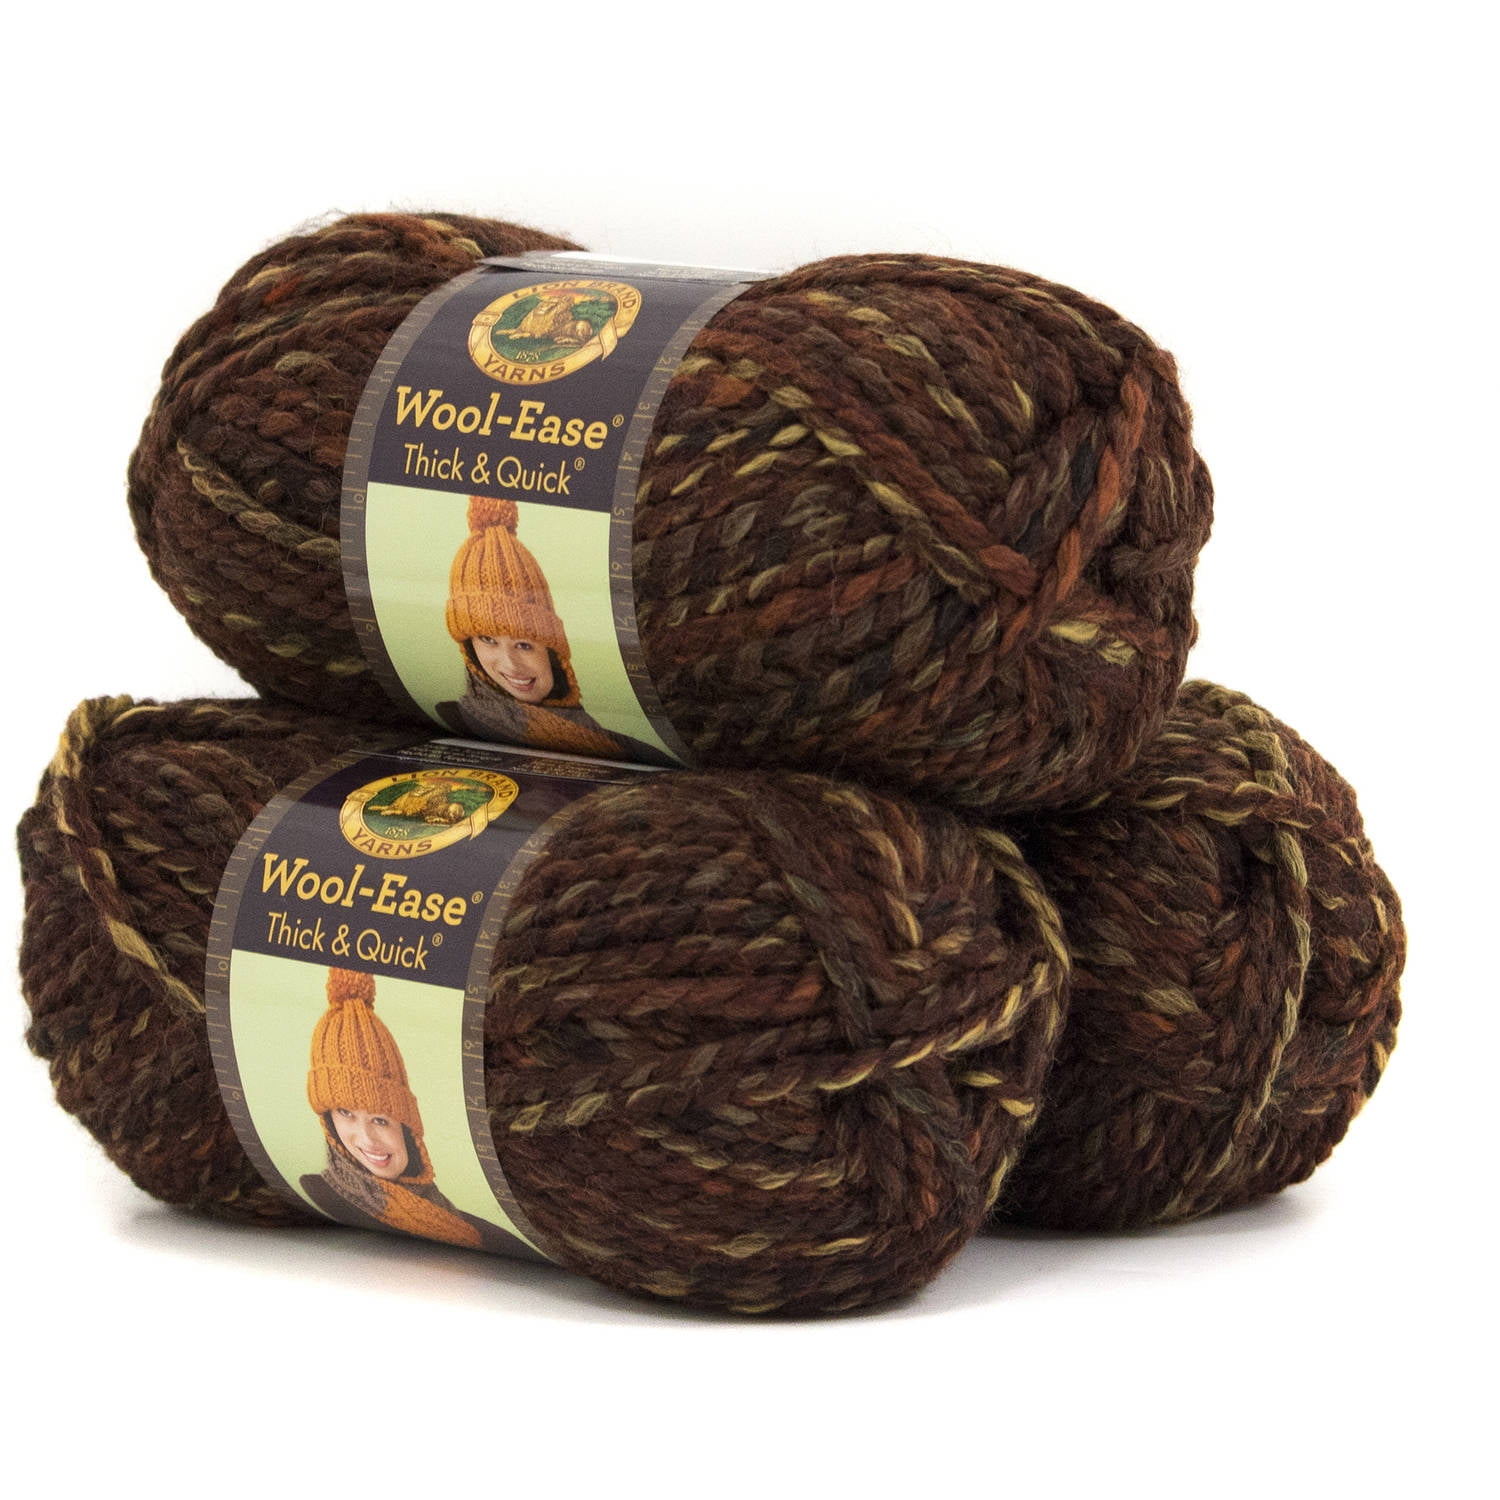 Lion Brand Wool Ease Recycled Yarn - Terracotta, 196 yds